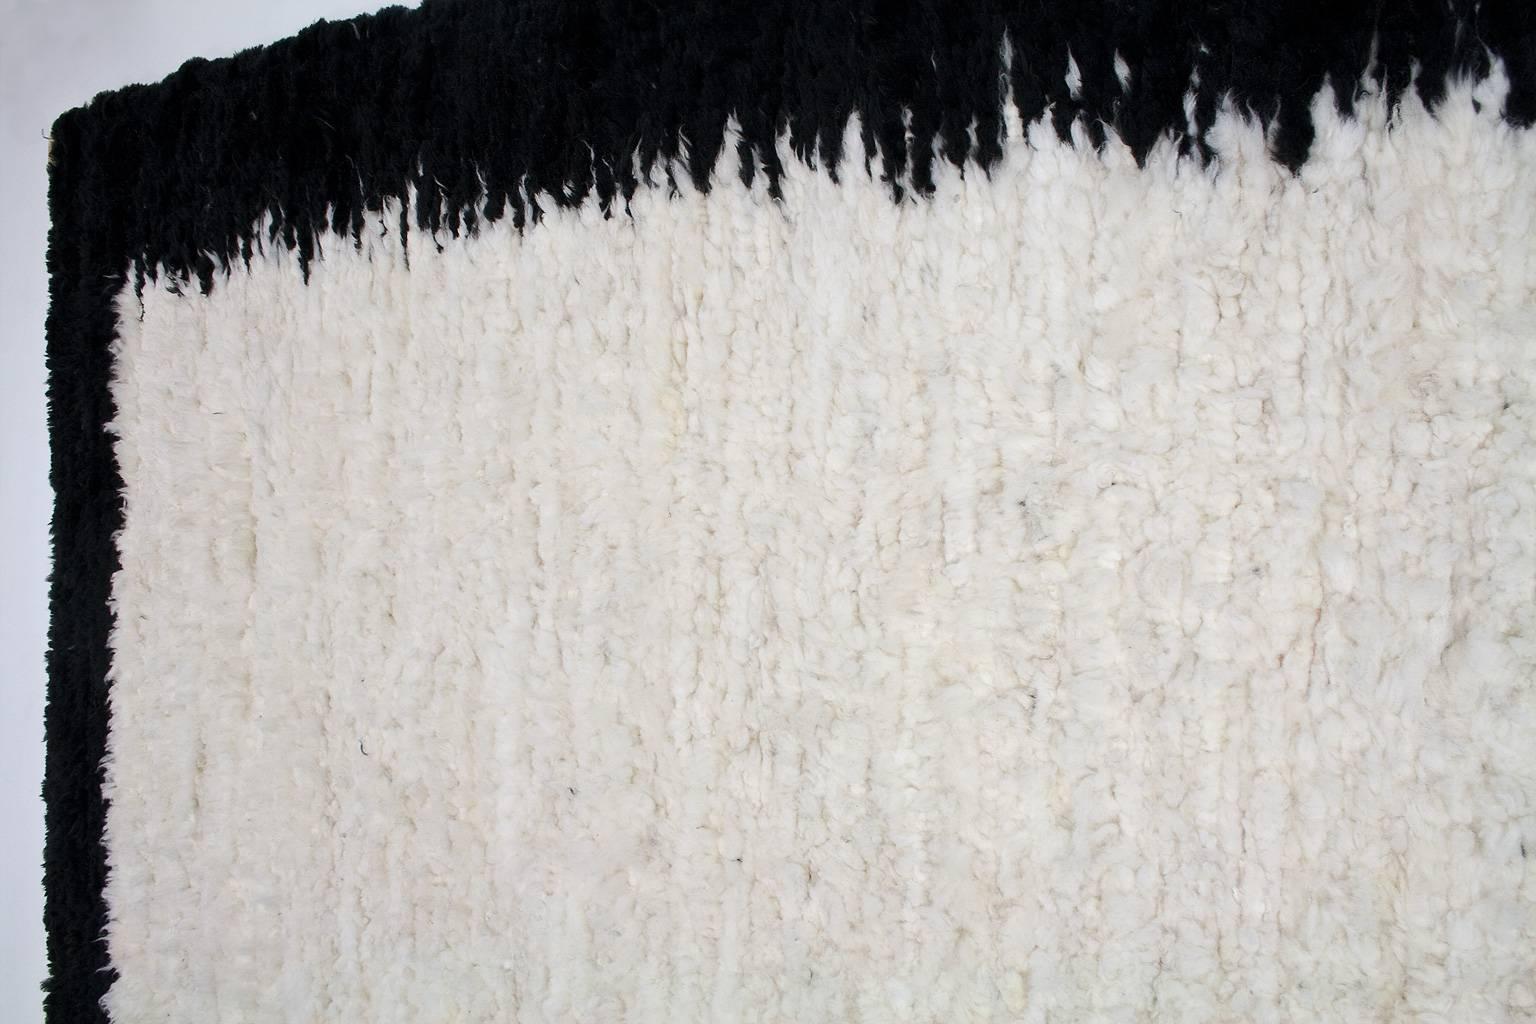 Very large and soft, black and white woven sheepskin hide, carpet or tapestry, 100% wool. The carpet is hand made yet, professionally woven and finished at the edges. The wool comes from a small, sustainable farm, only the best wool is selected and